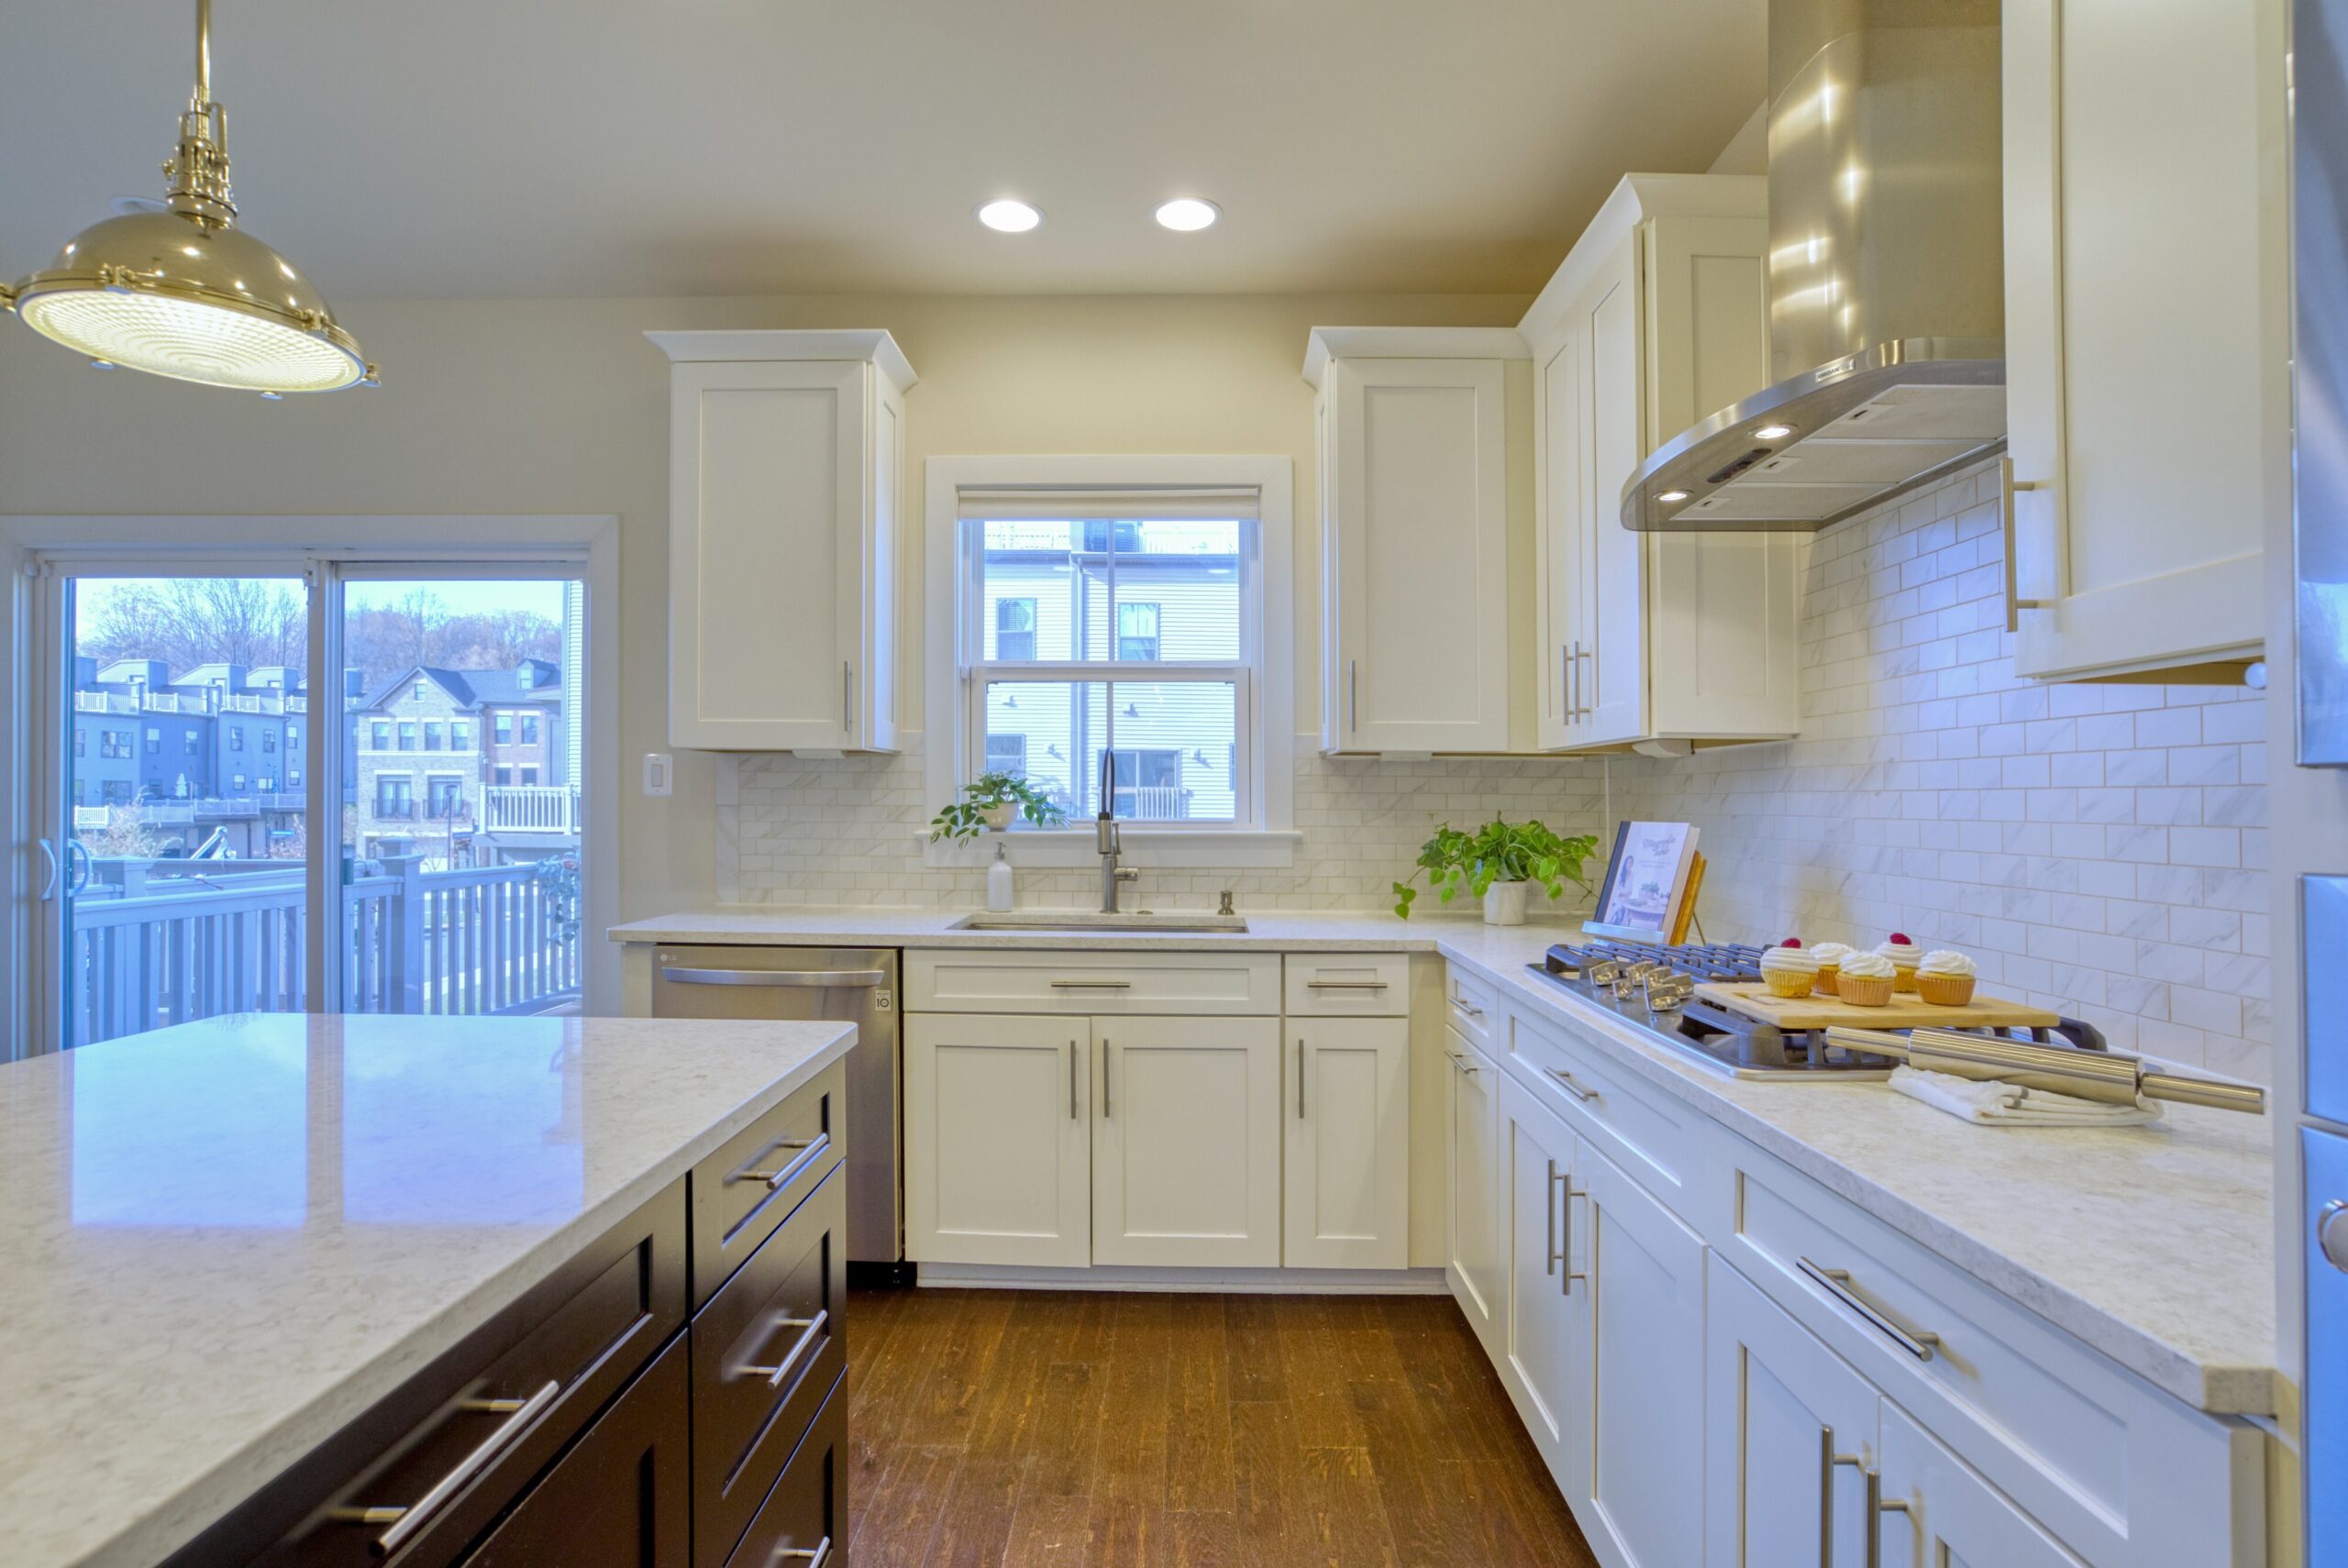 Professional interior photo of 3165 Virginia Bluebell Ct, Fairfax - showing the white kitchen and large island from an angle with view towards the rear windows